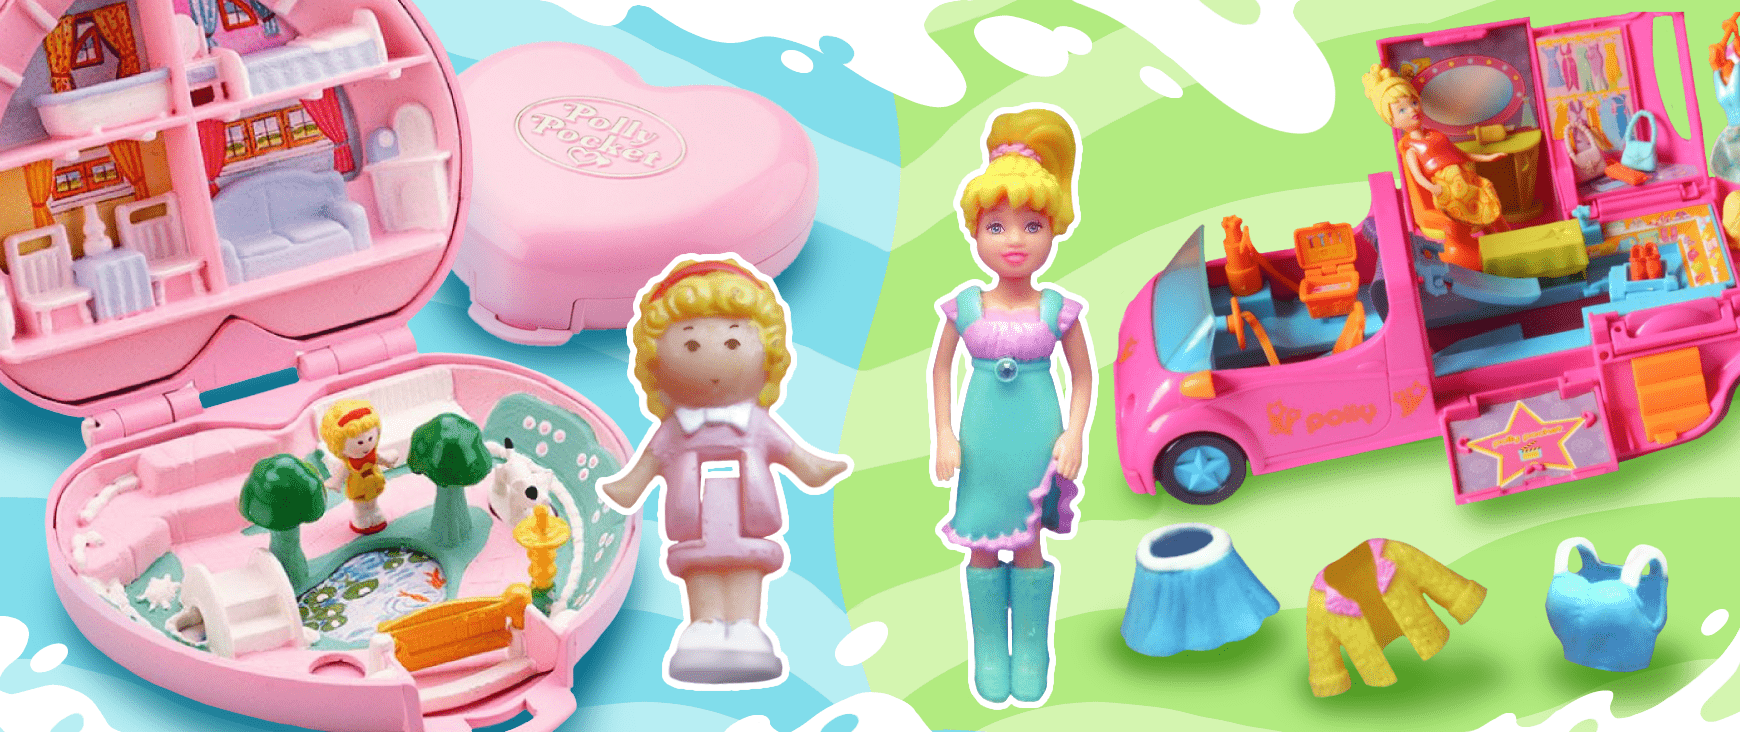 Polly Pocket had several redesigns